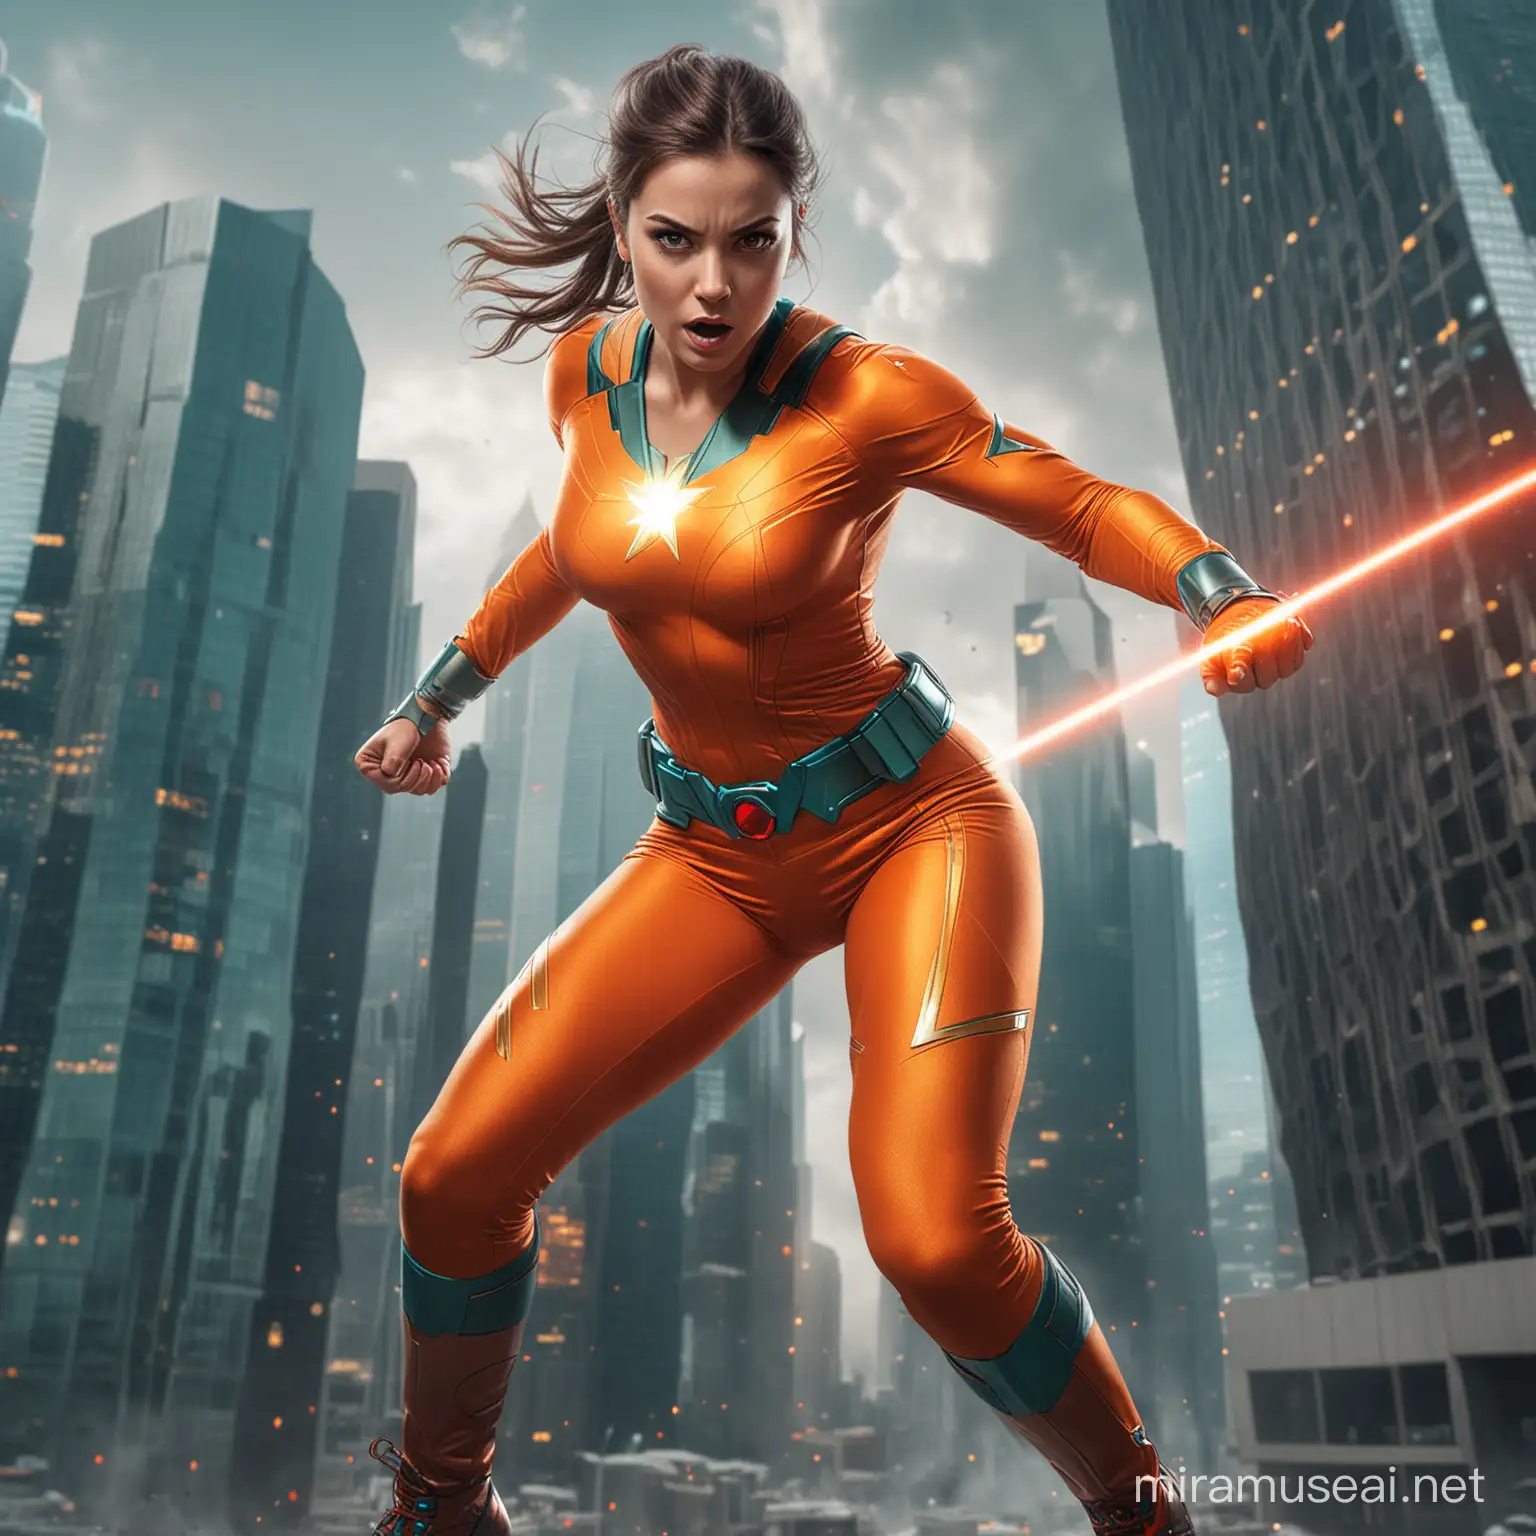 Angry Female Superhero with Glowing Red Laser Eyes Soars Over Urban Skyscrapers